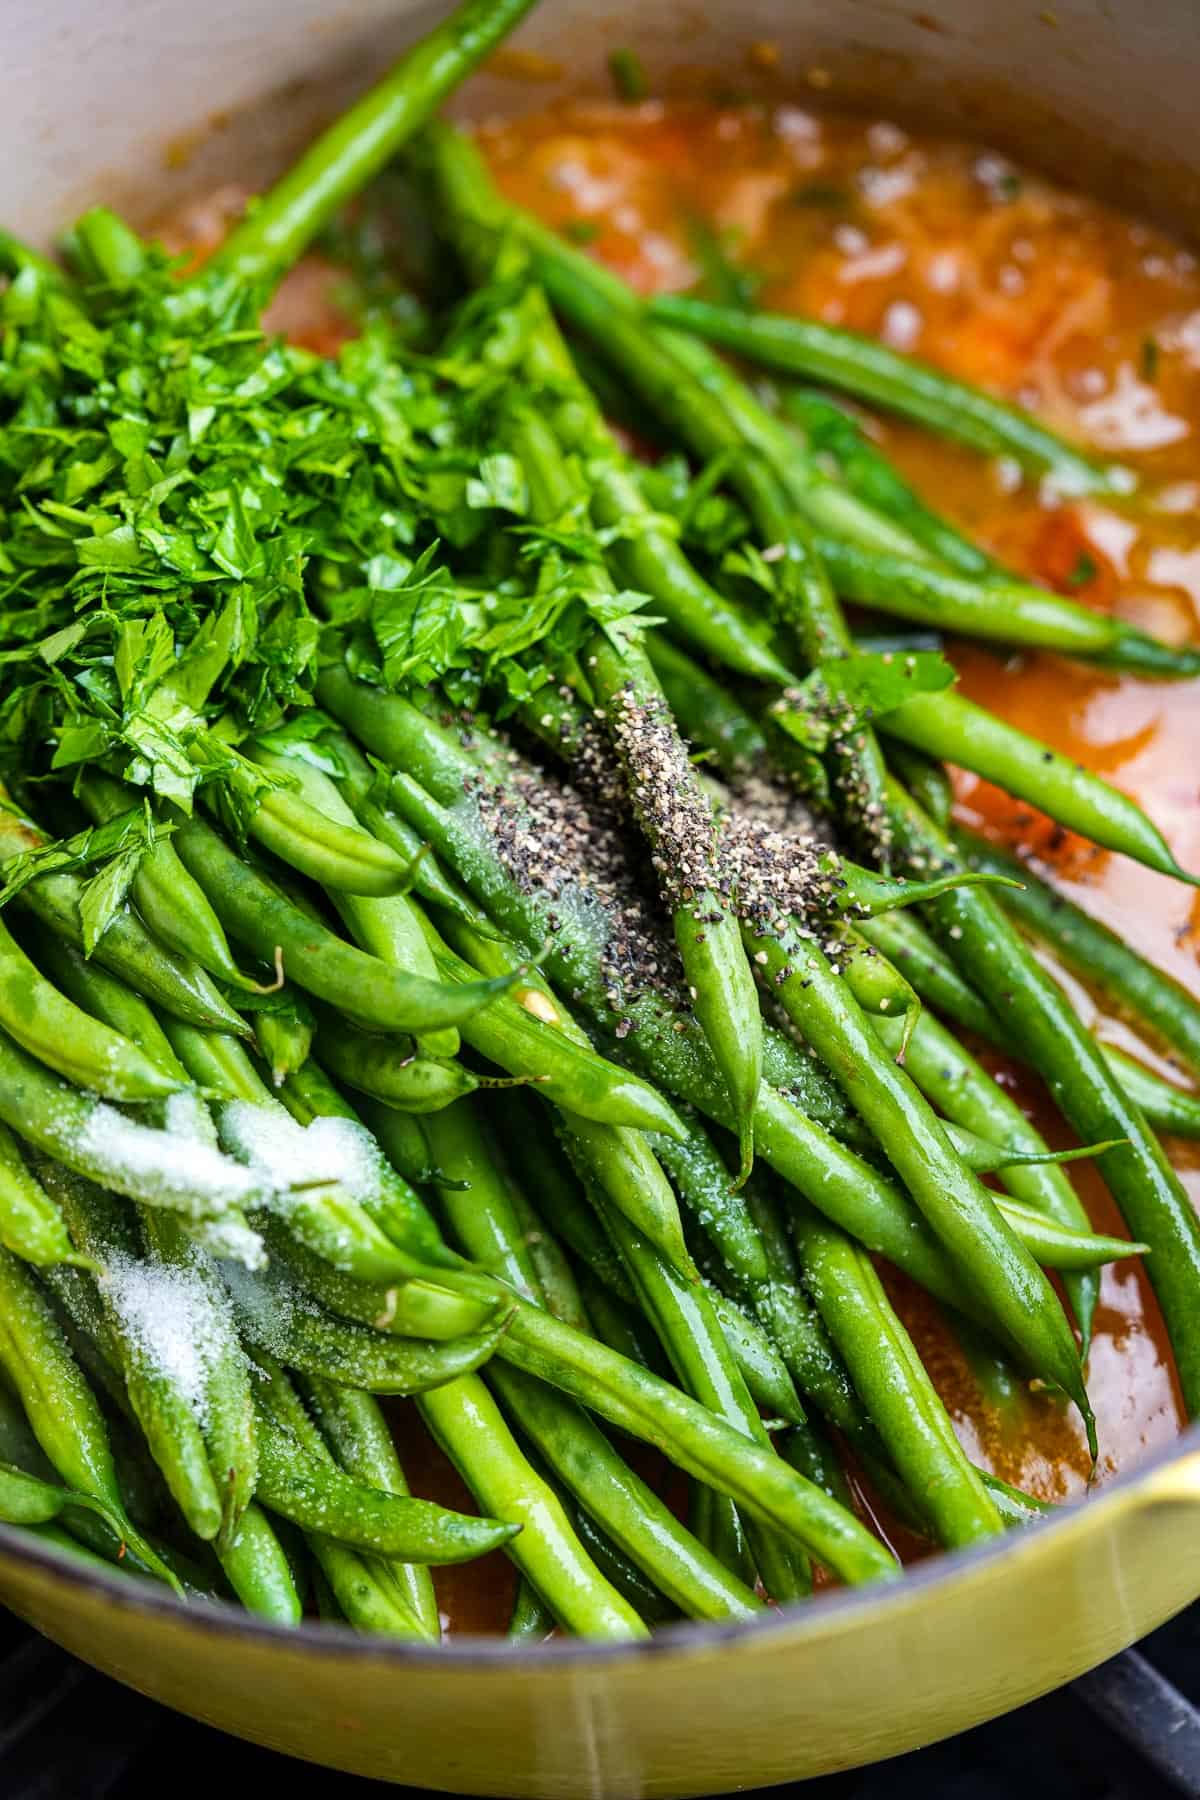 Green beans steaming in a sauce with parsley on a stove.